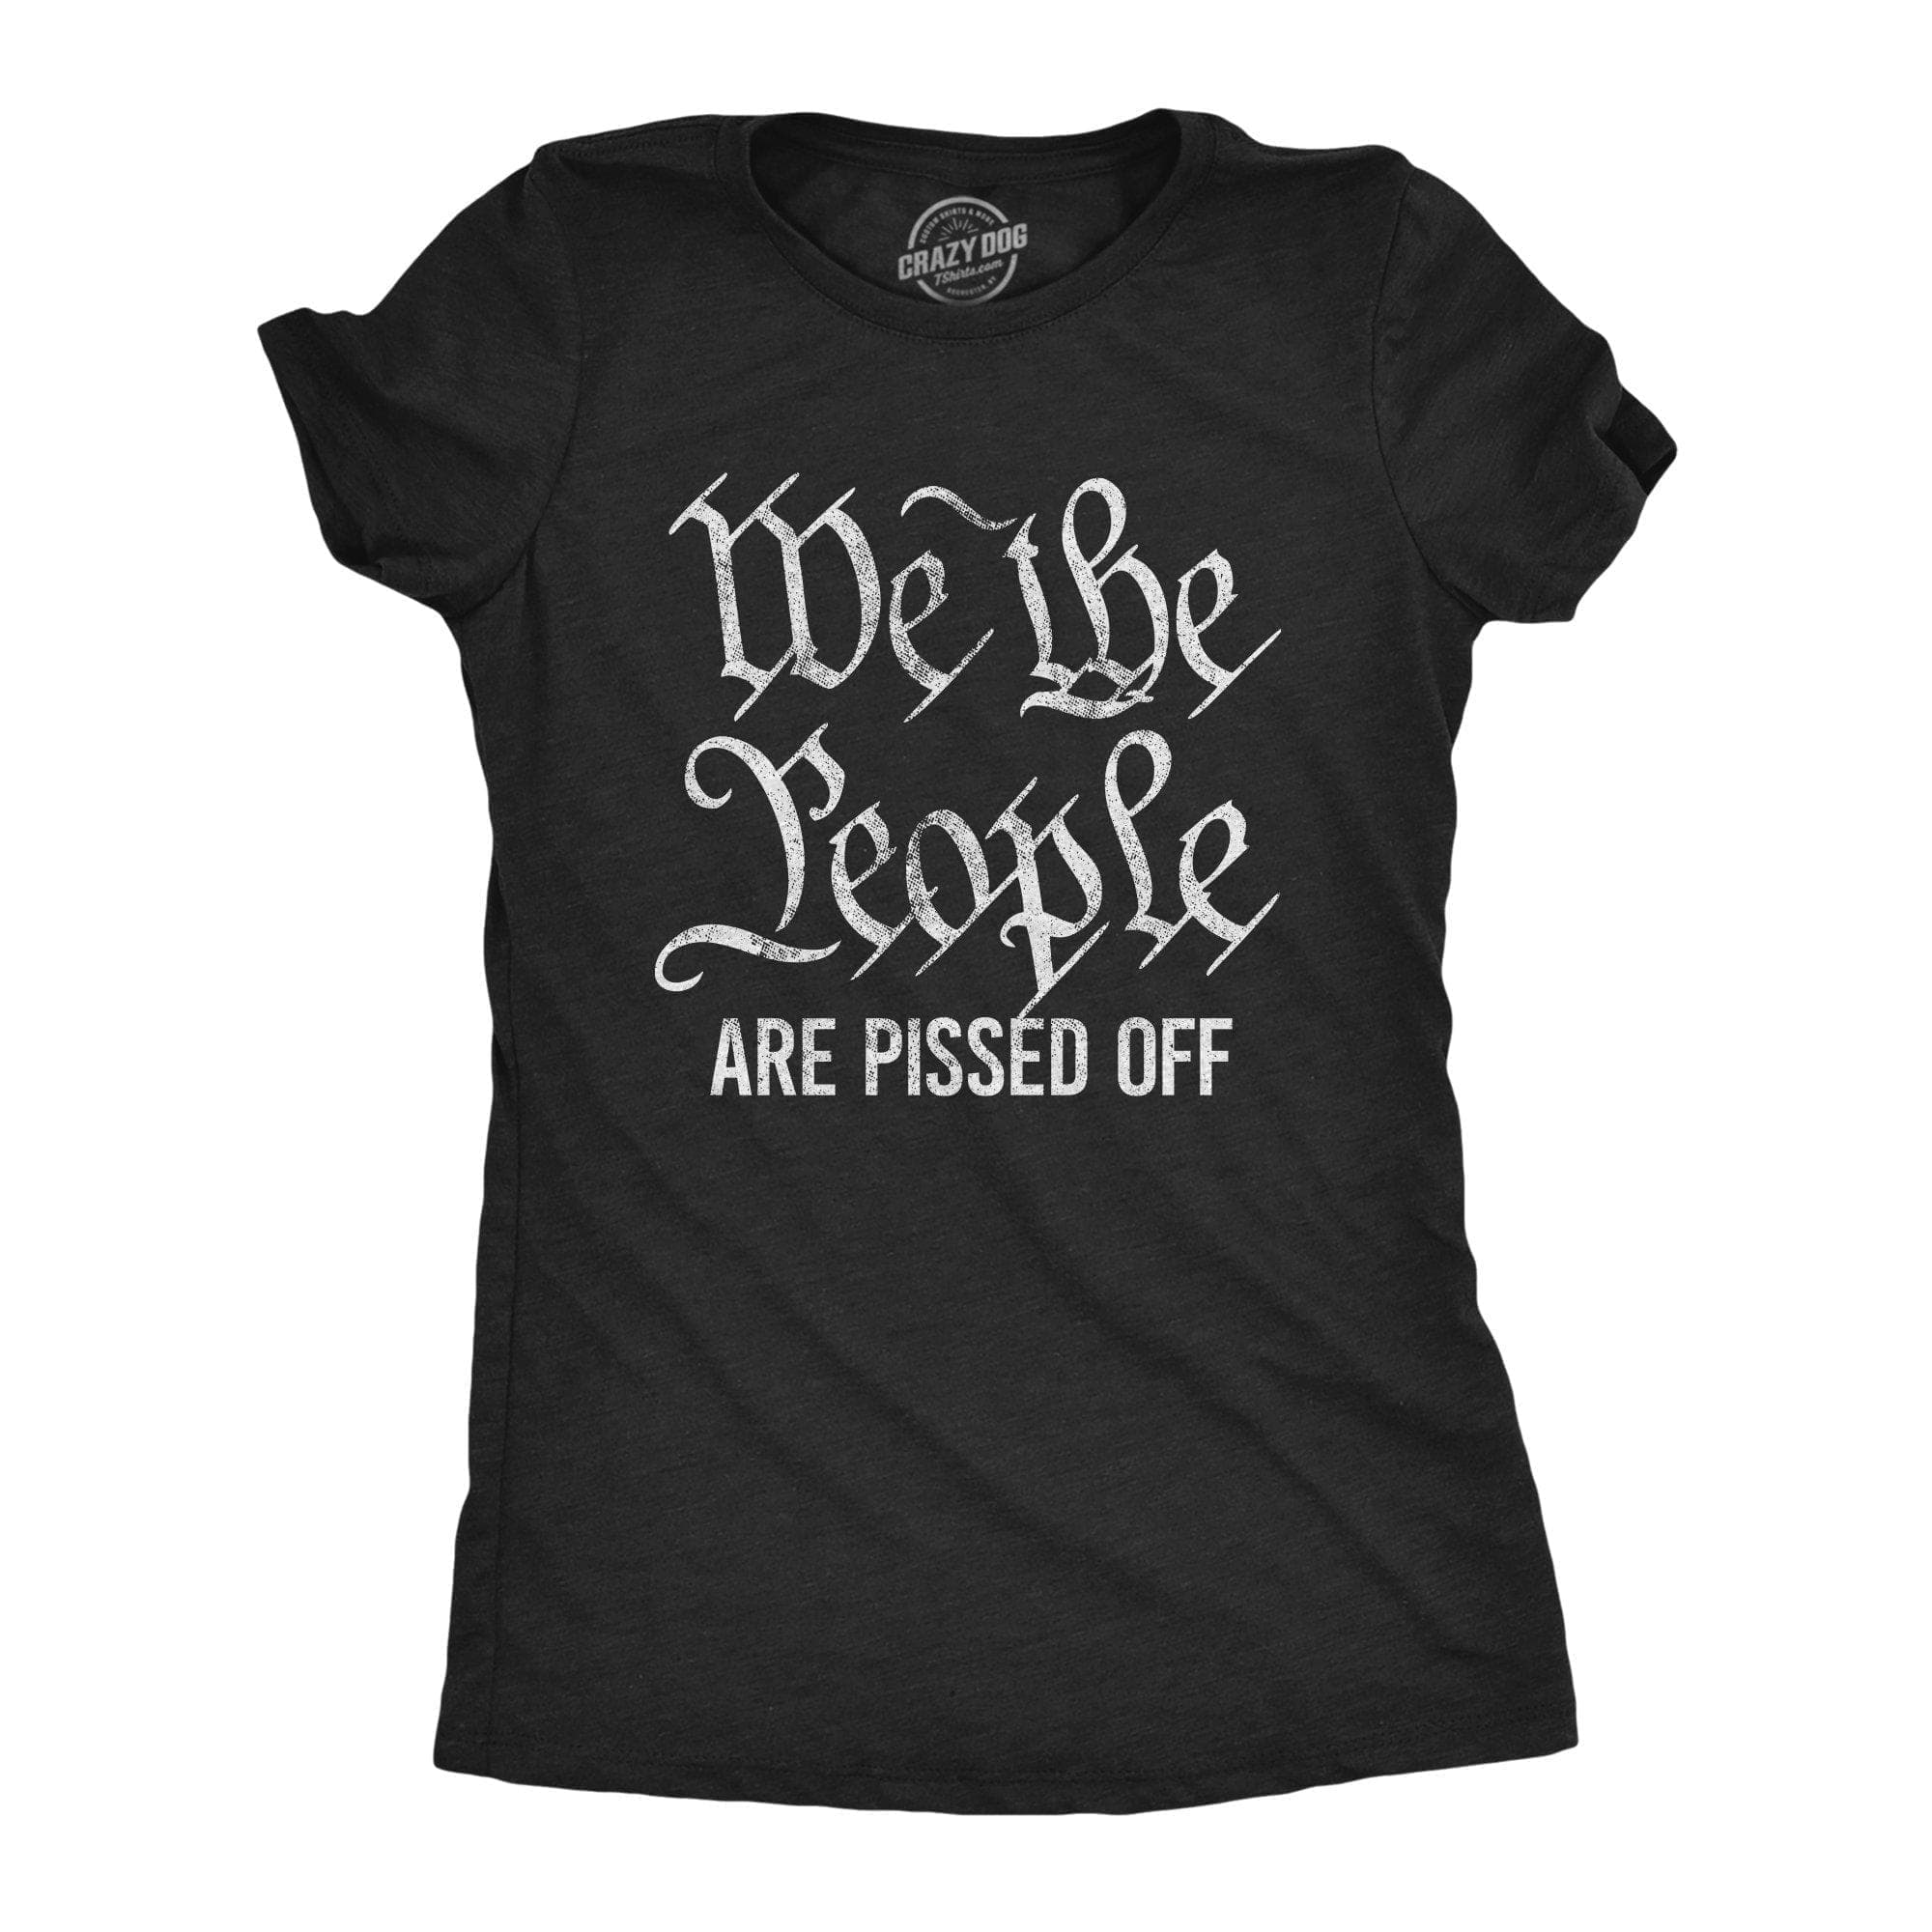 We The People Are Pissed Off Women's Tshirt - Crazy Dog T-Shirts